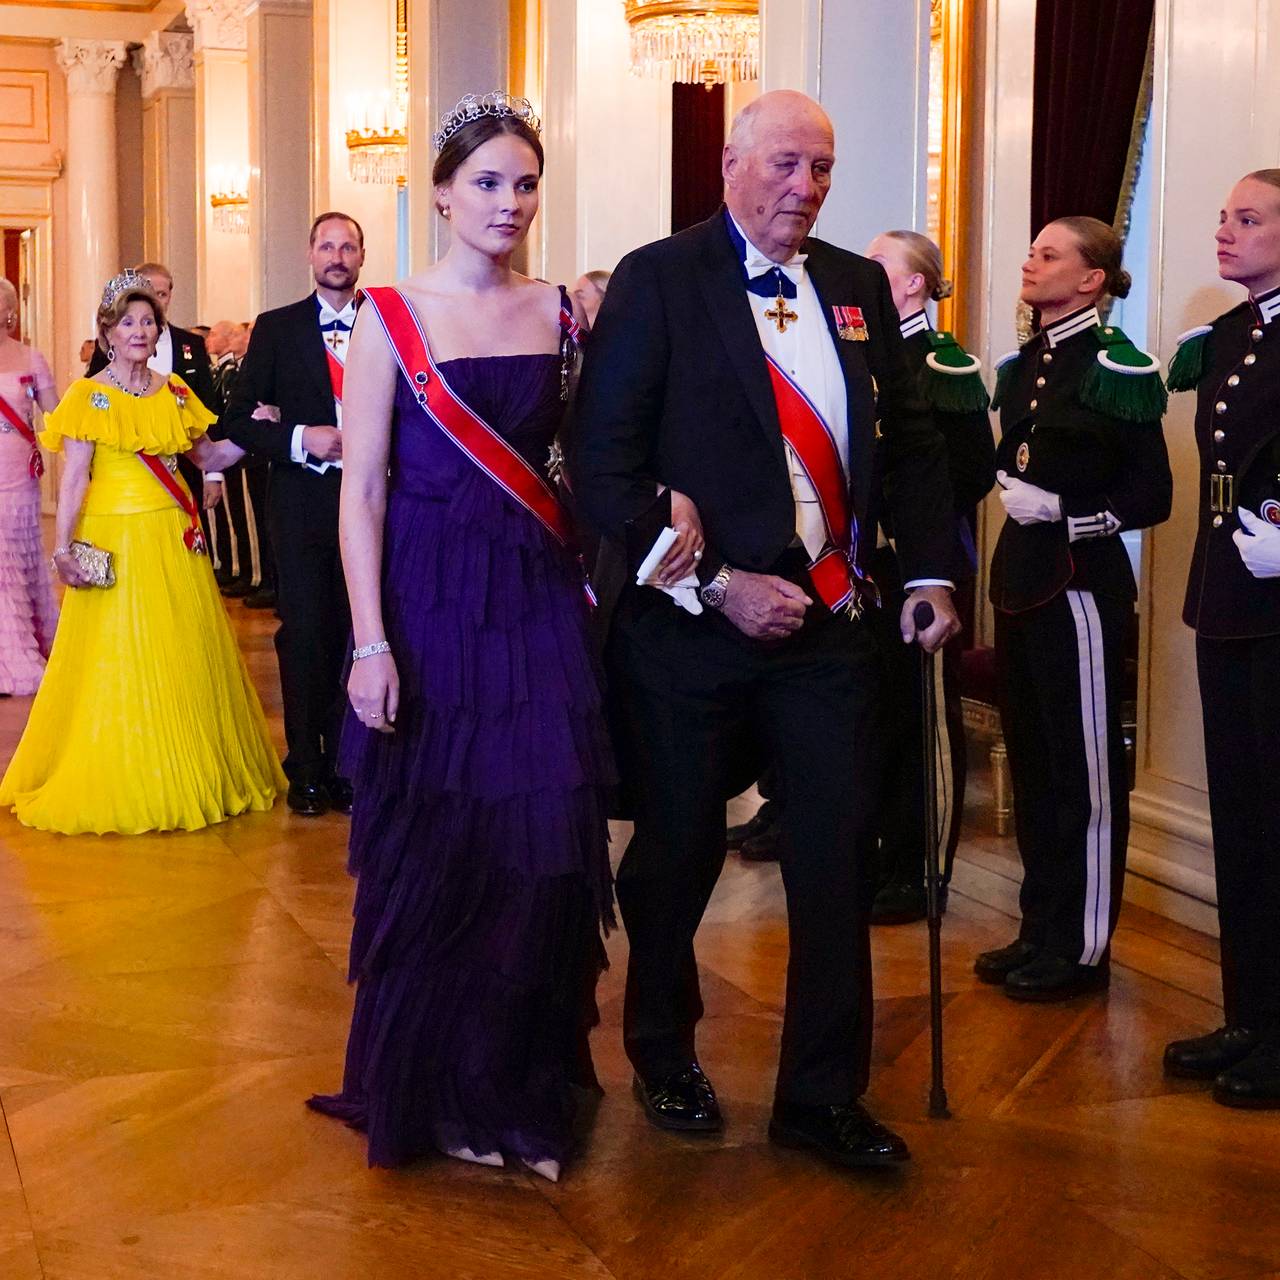 The official day of Princess Ingrid Alexandra is celebrated with a gala dinner at the castle